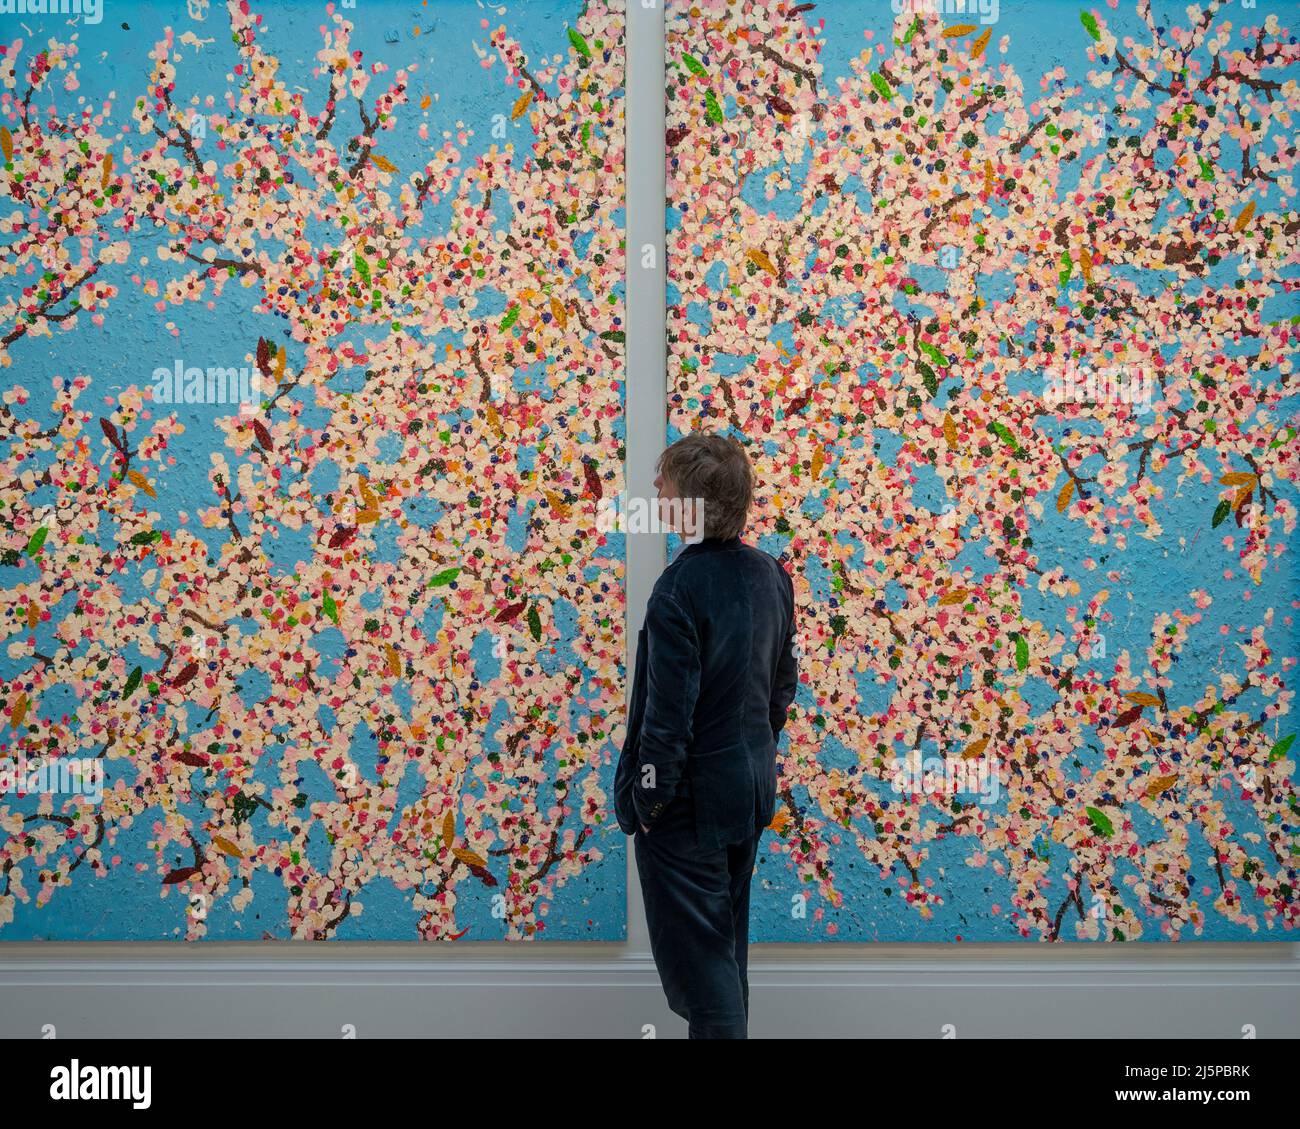 Sotheby’s, London, UK. 25 April 2022. Preview of major auction highlights in a travelling exhibition from The New York Modern day and evening sales to take place on 17-18 May 2022. Image: Damien Hirst, Happy Life Blossom, 2018, estimated in the region of $2 Million - 3 Million. Credit: Malcolm Park/Alamy Live News Stock Photo